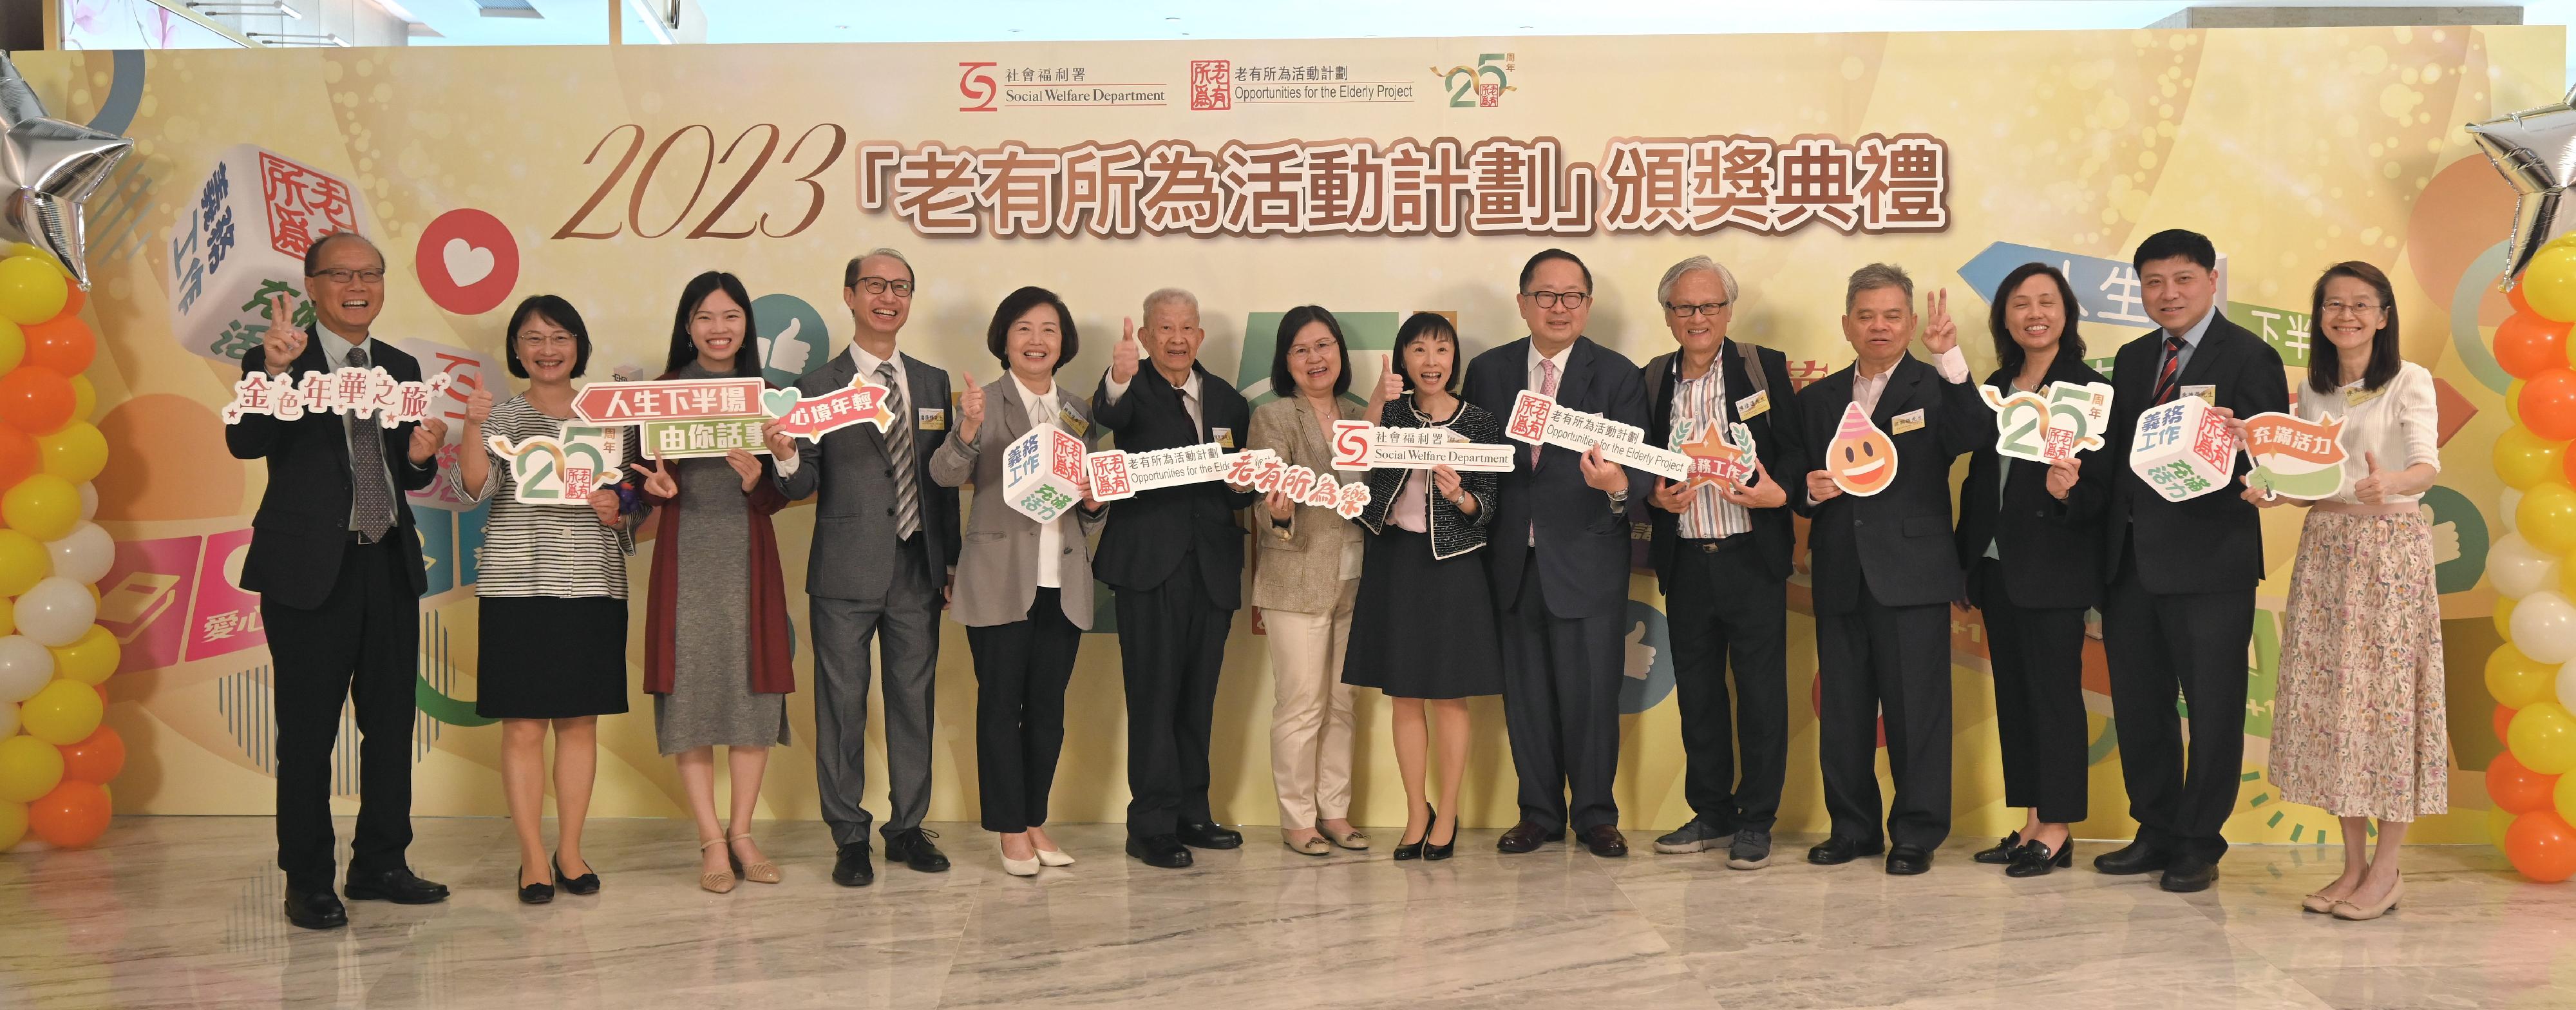 The Social Welfare Department today (November 1) held the 2023 Award Presentation Ceremony of the Opportunities for the Elderly Project (OEP). Photo shows the Director of Social Welfare, Miss Charmaine Lee (seventh right), with the Chairman of the Elderly Commission, Dr Donald Li (sixth right), the Chairman of the OEP Advisory Committee, Professor Diana Lee (seventh left), and other guests before the ceremony.